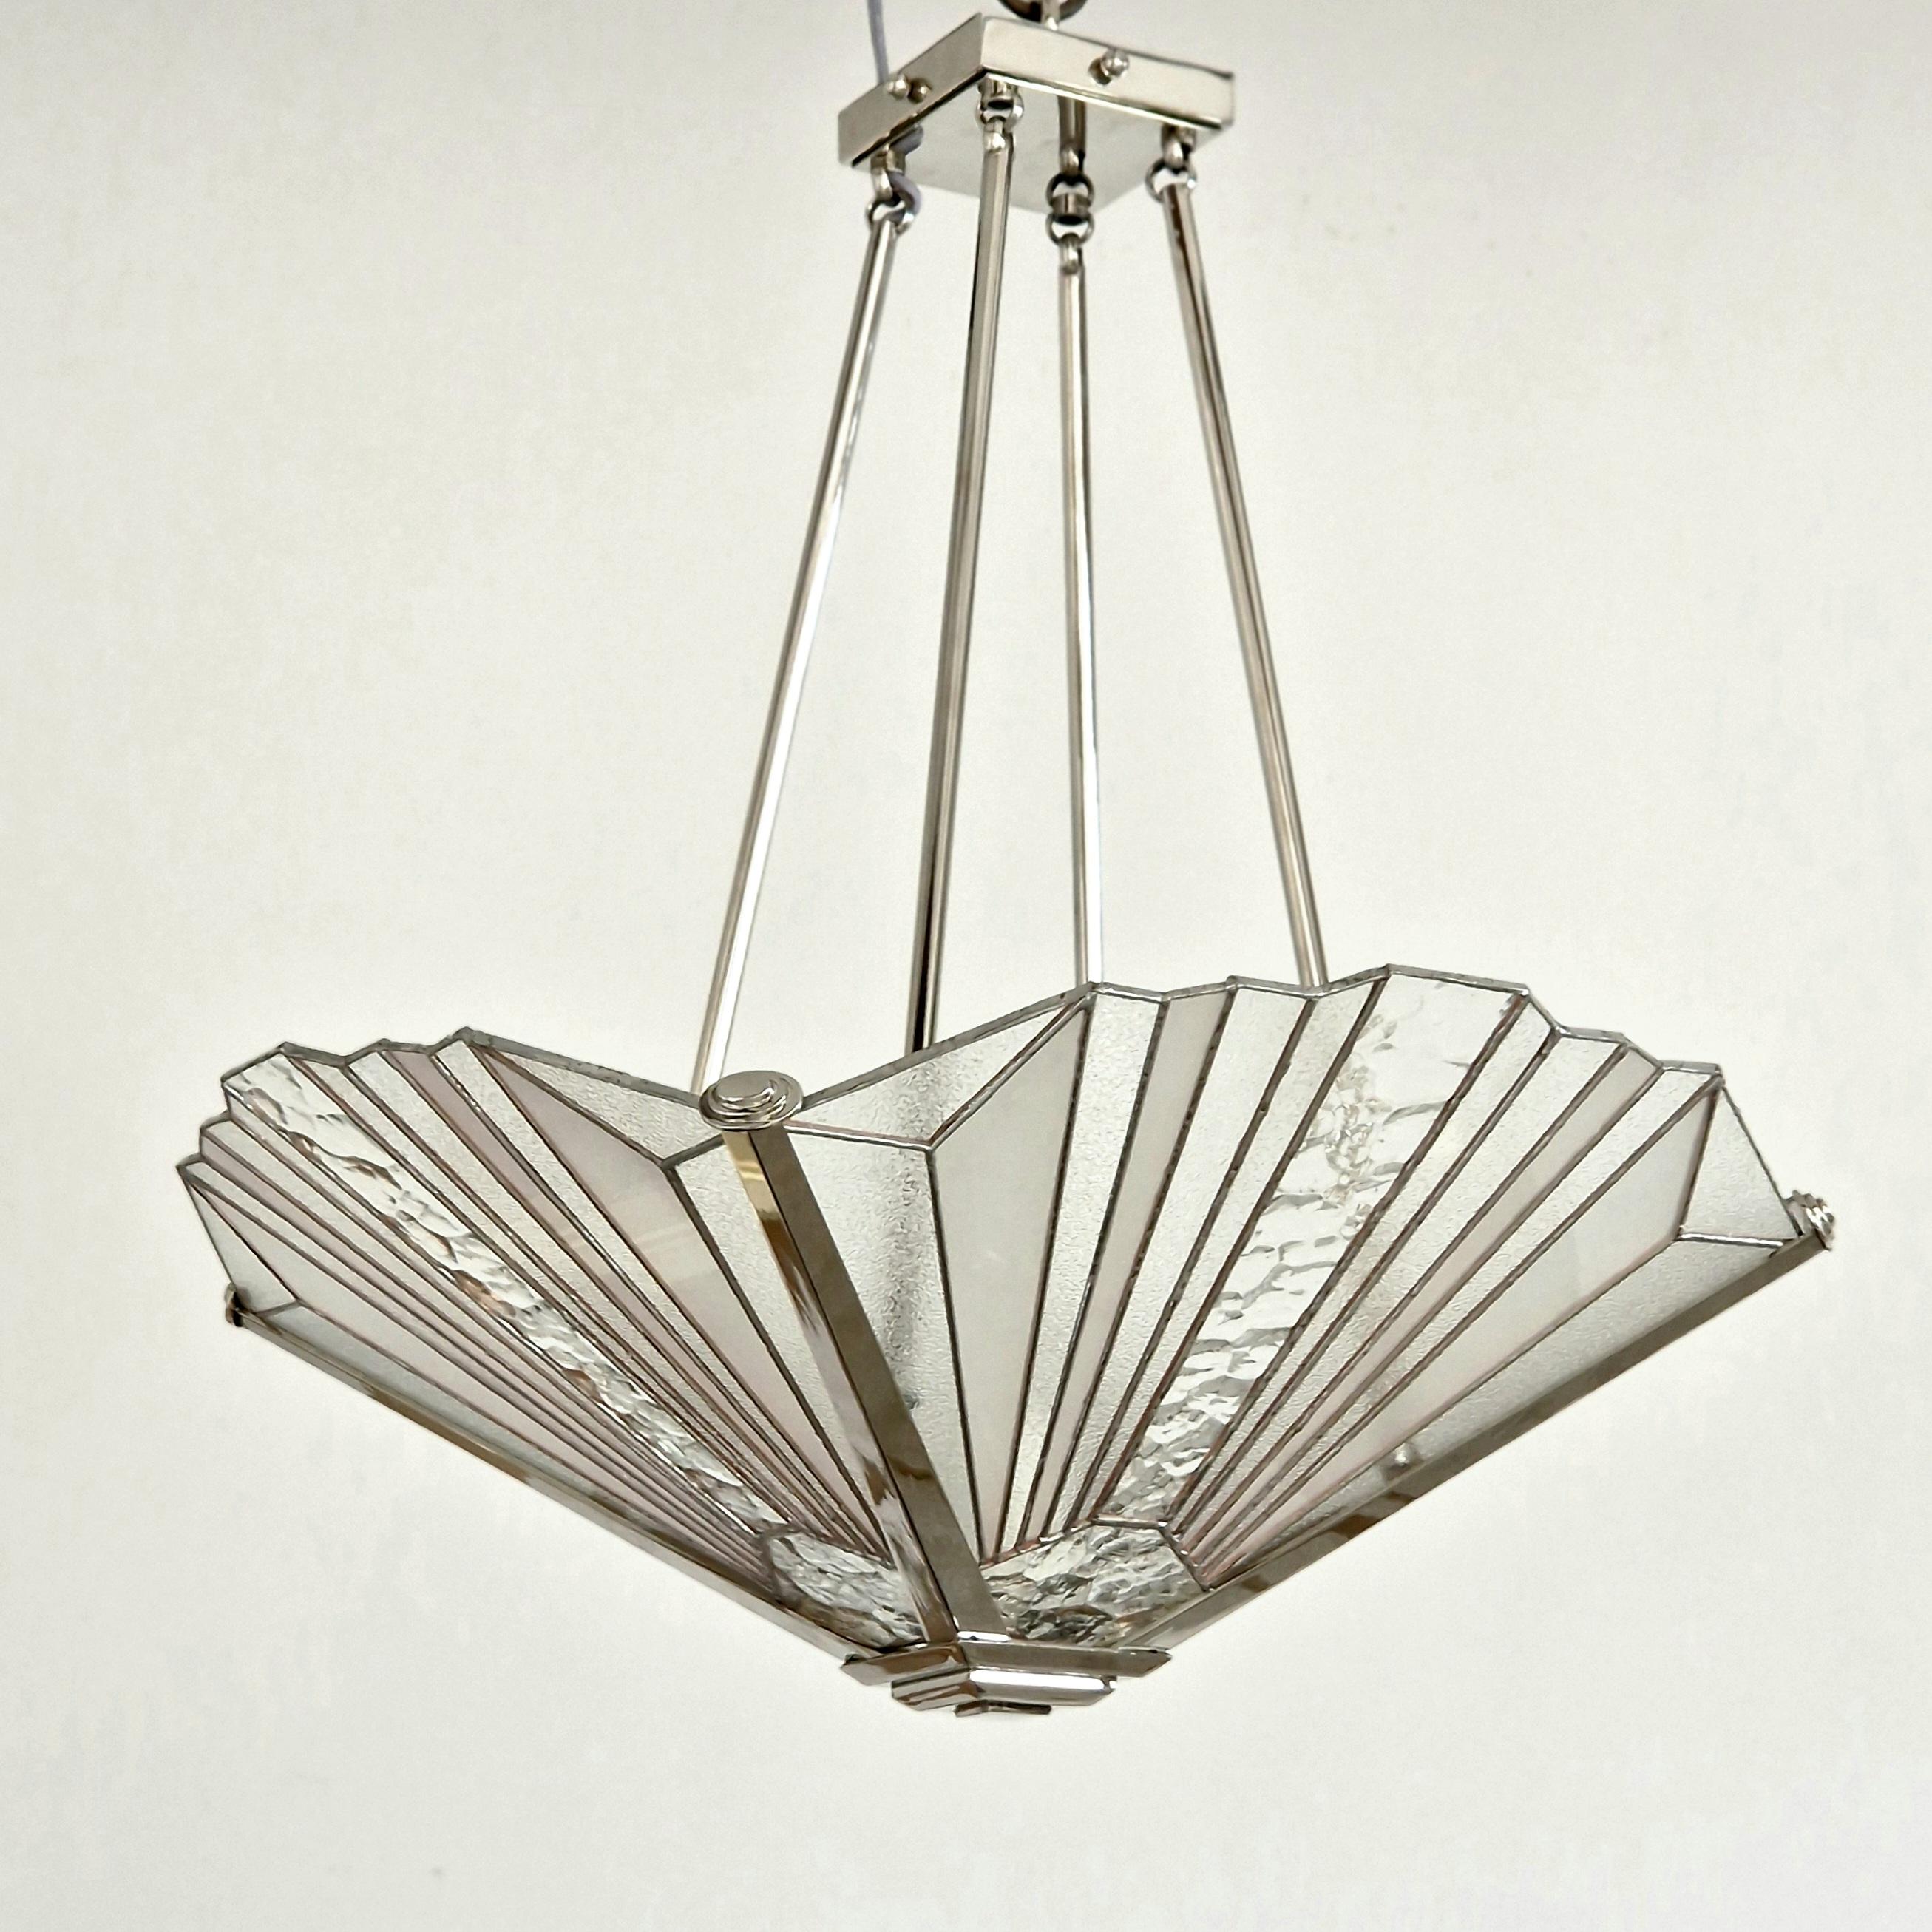 Art Deco bronze chandelier with nickel finish and Tiffany vitrail.